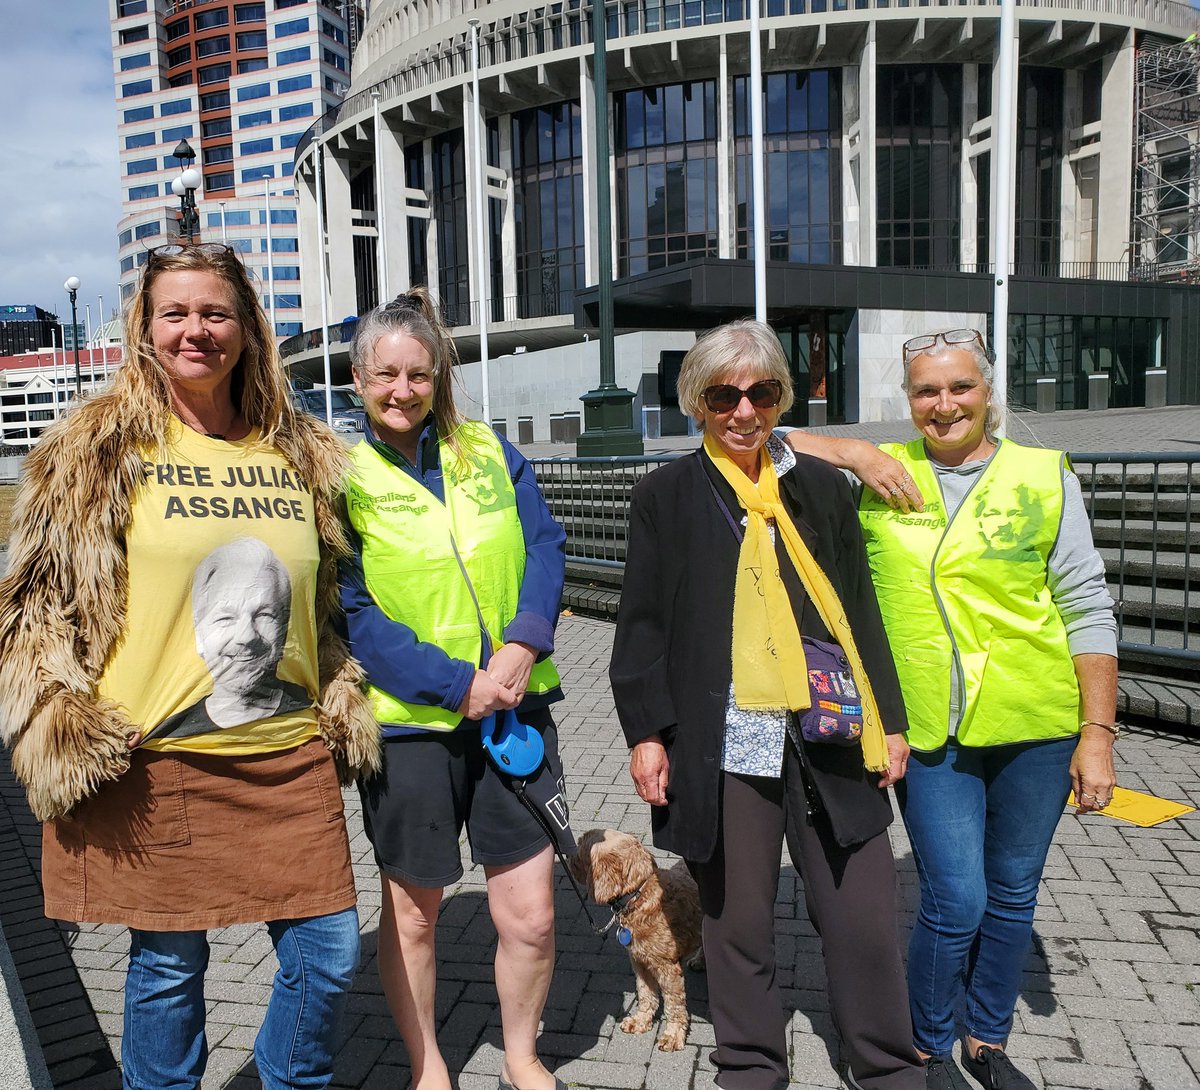 NZ Parliament DayX @FreeAssangeNZ Tuesday 20th Feb 1924 first to arrive: 4 yellow-clad ladies in support of Julian Assange👊❤️ #YellowRibbons4Assange @TRUMANHUMAN2020